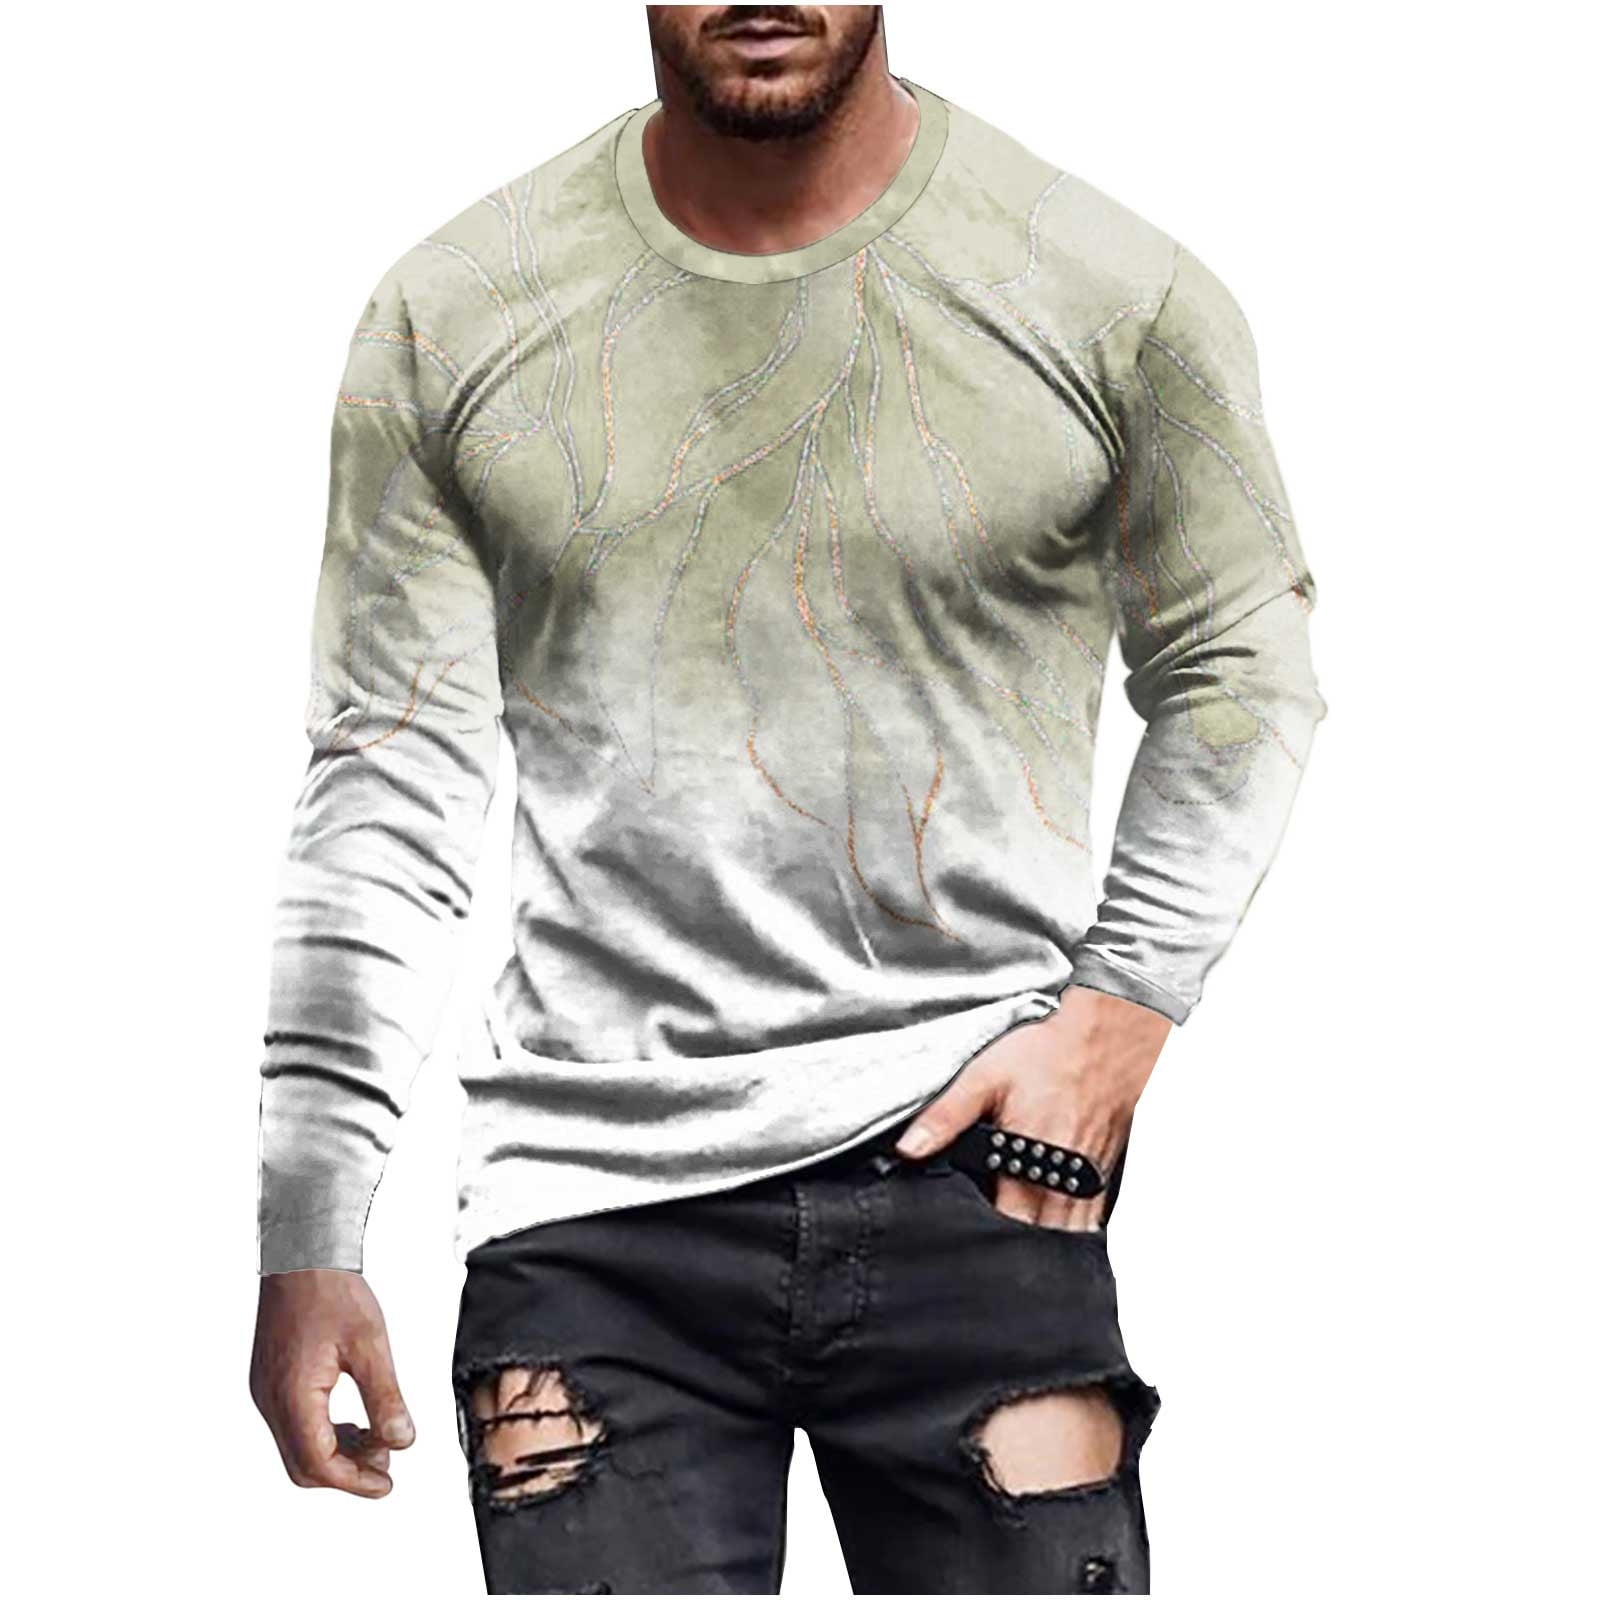 Amtdh Trendy T-shirts for Men Clearance Long Sleeve Gradient Print O-Neck Casual Men's Gym Training Fitness T-shirts Soft Fitting Lightweight Blouses